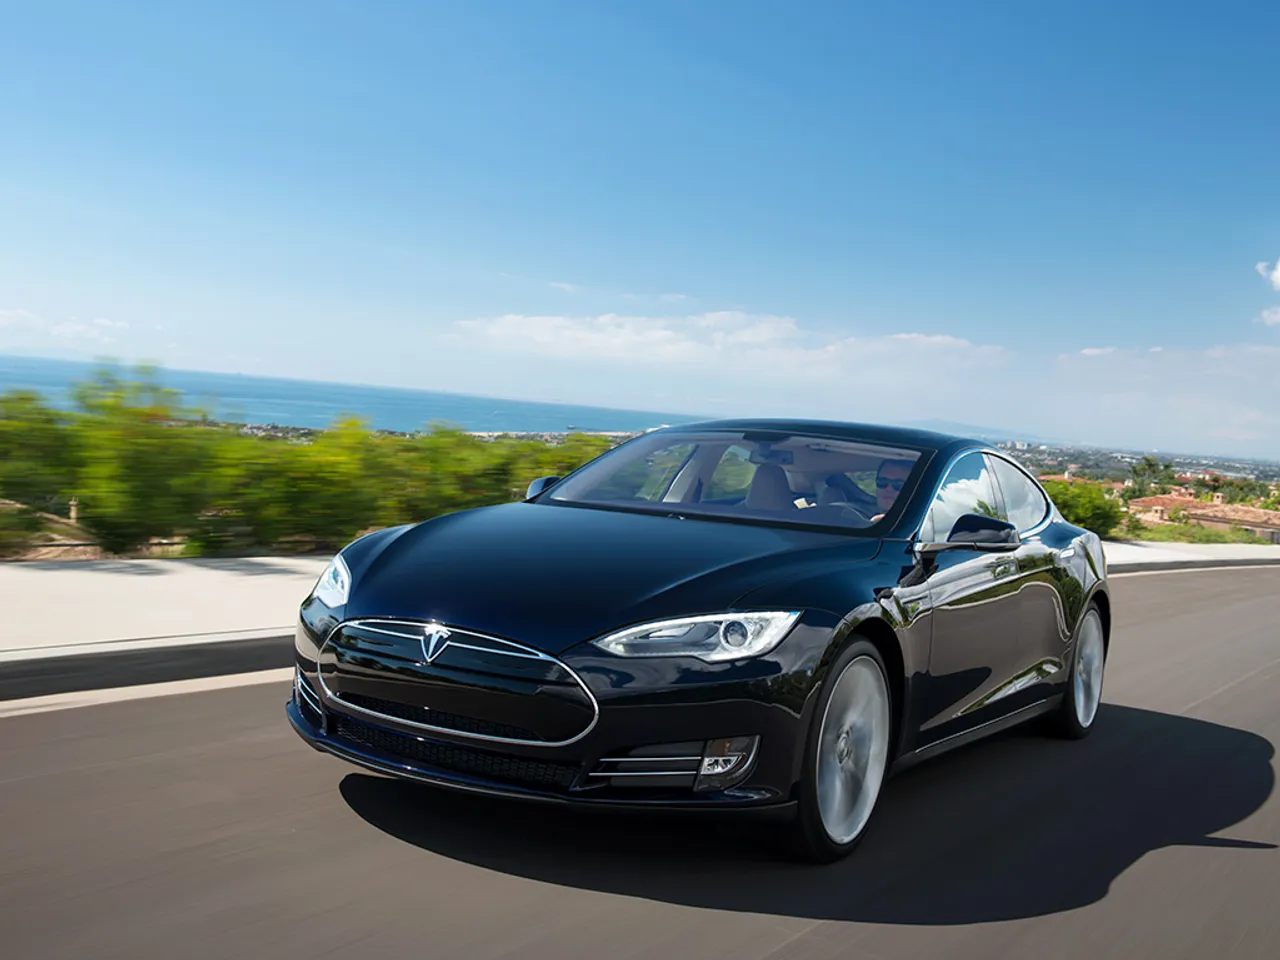 CIOL Tesla’s most affordable Model S becomes more affordable with $5000 price cut